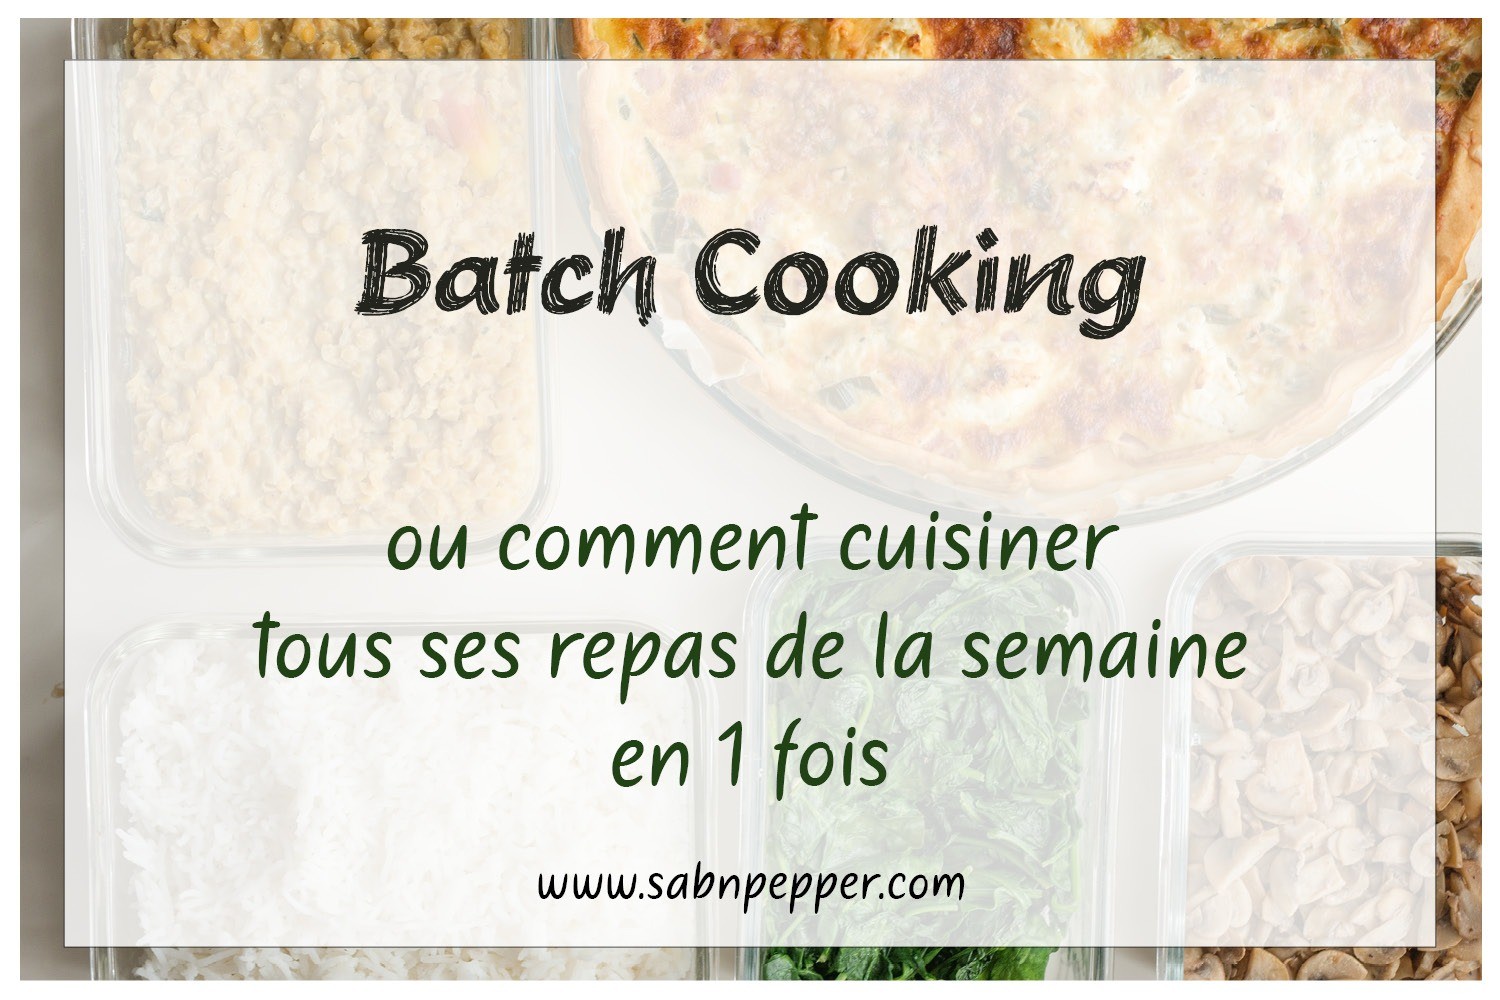 Batch-cooking, comment s'organiser ? –